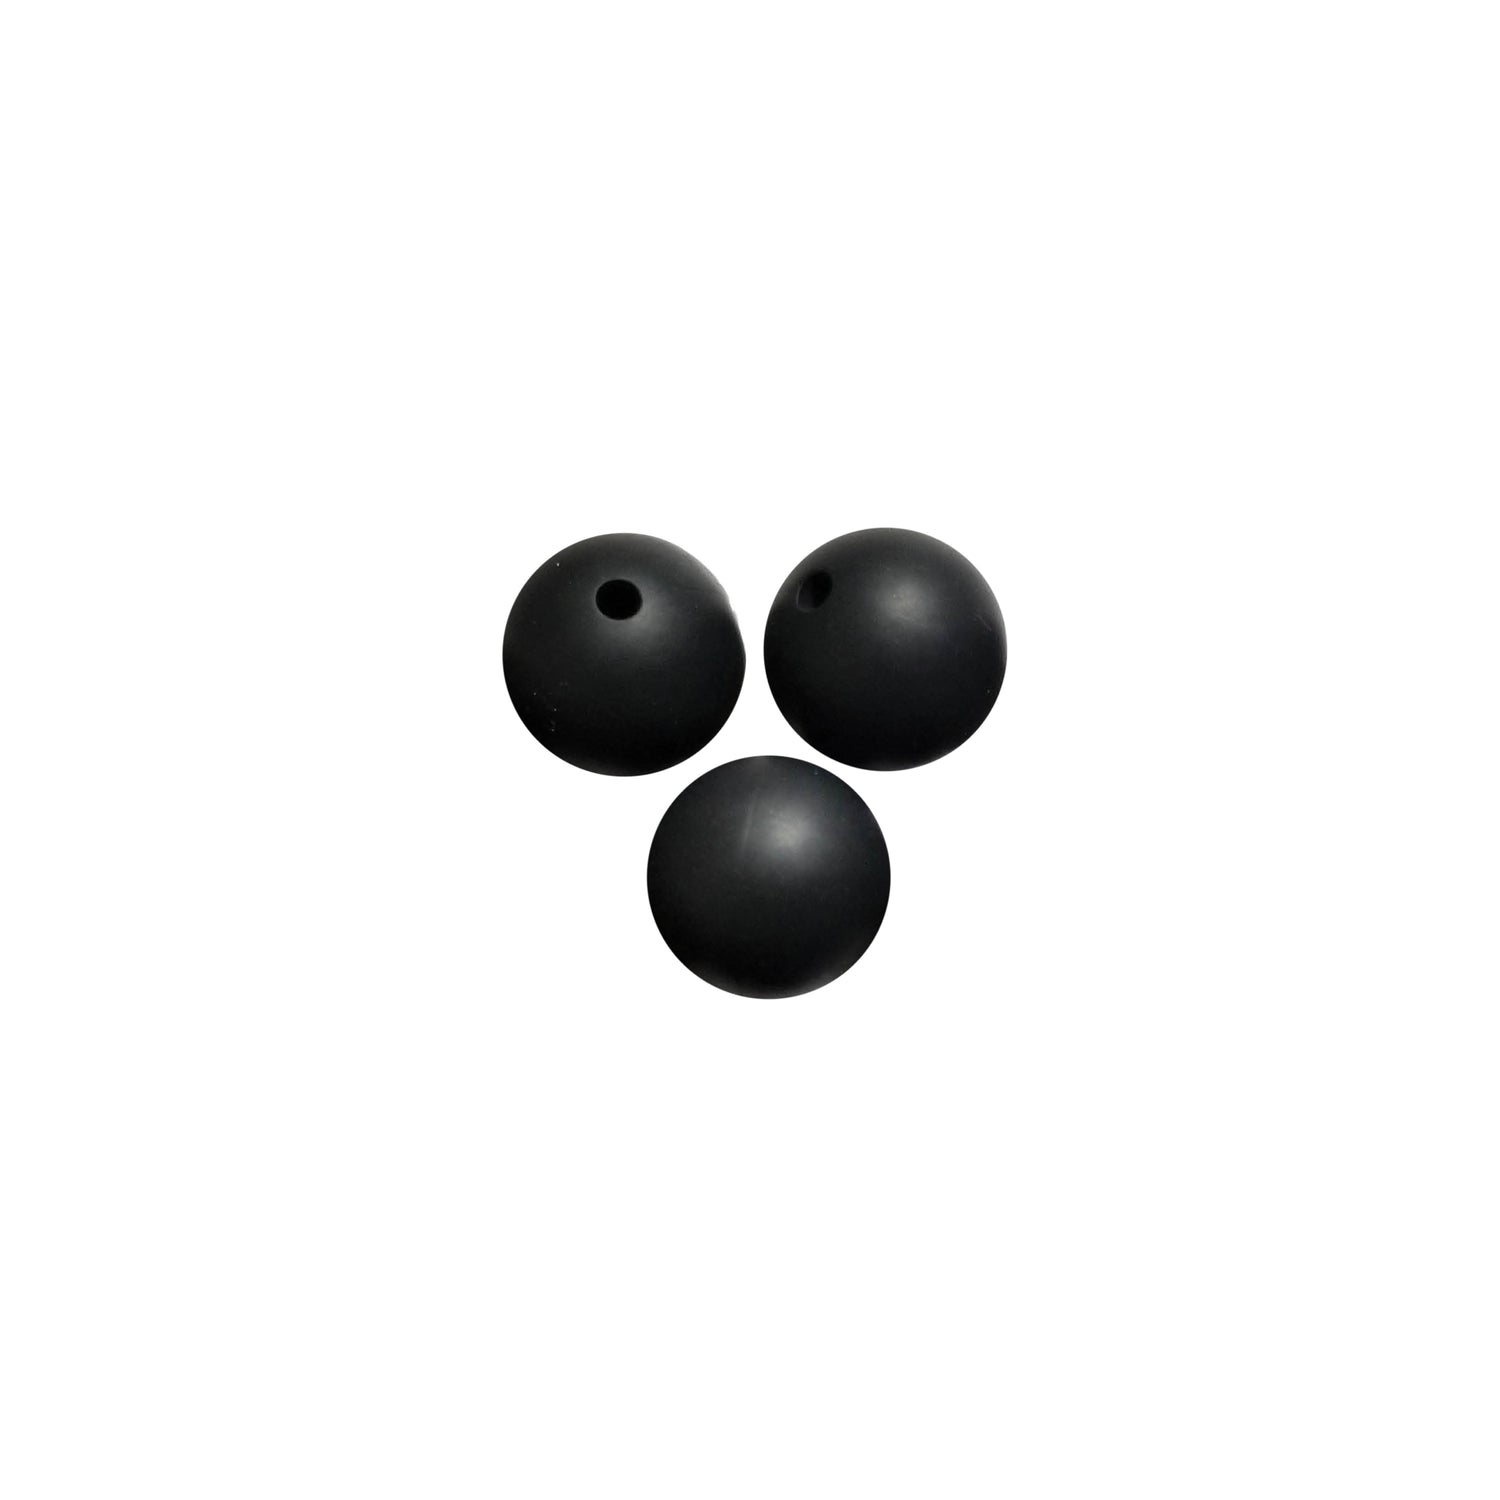 15mm black round silicone beads